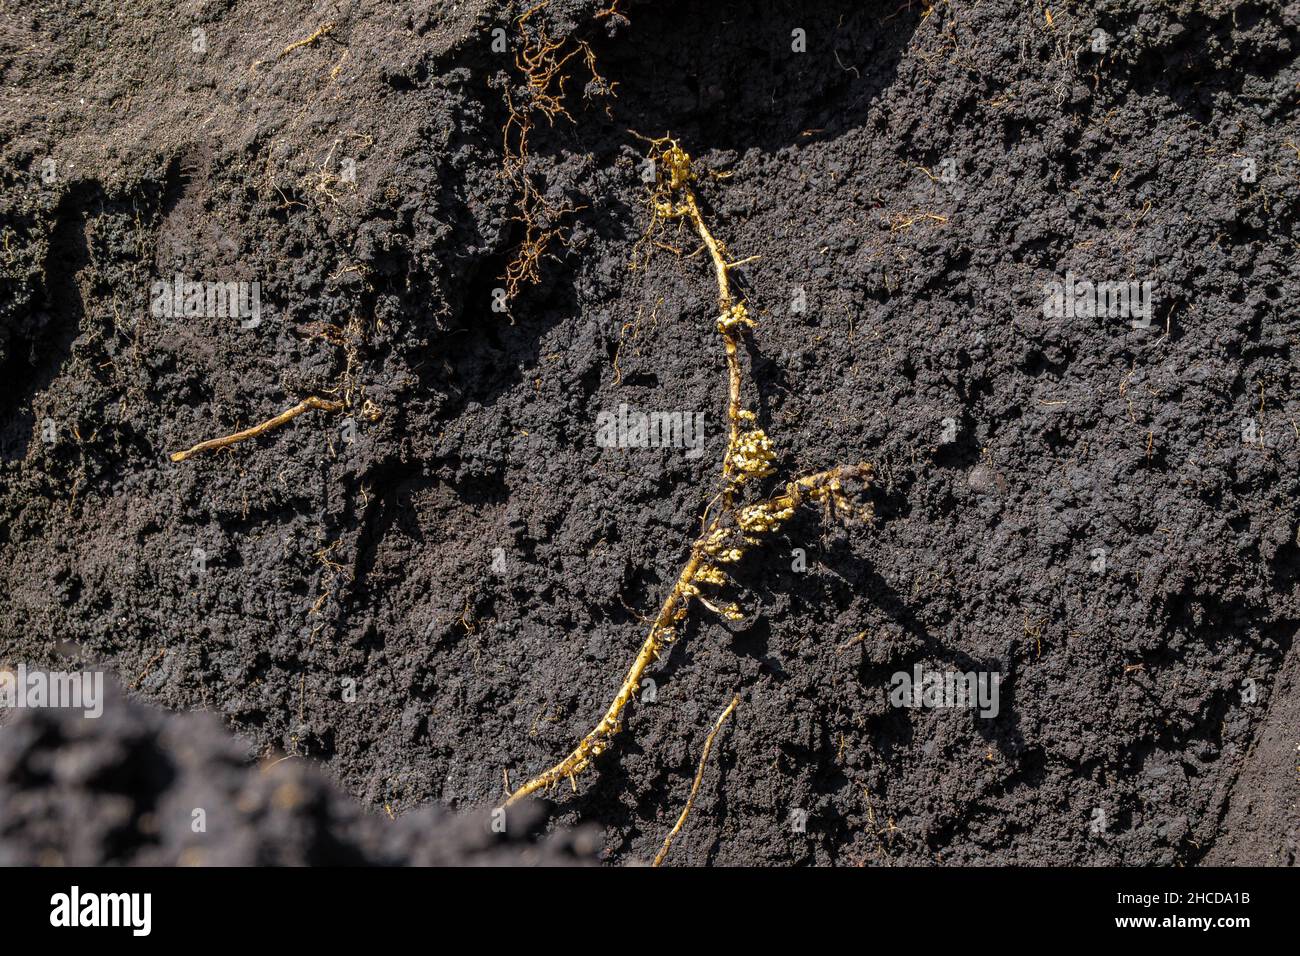 dug out branched root of a weed plant - field bindweed, which oppresses cultivated agricultural plants, selective focus Stock Photo